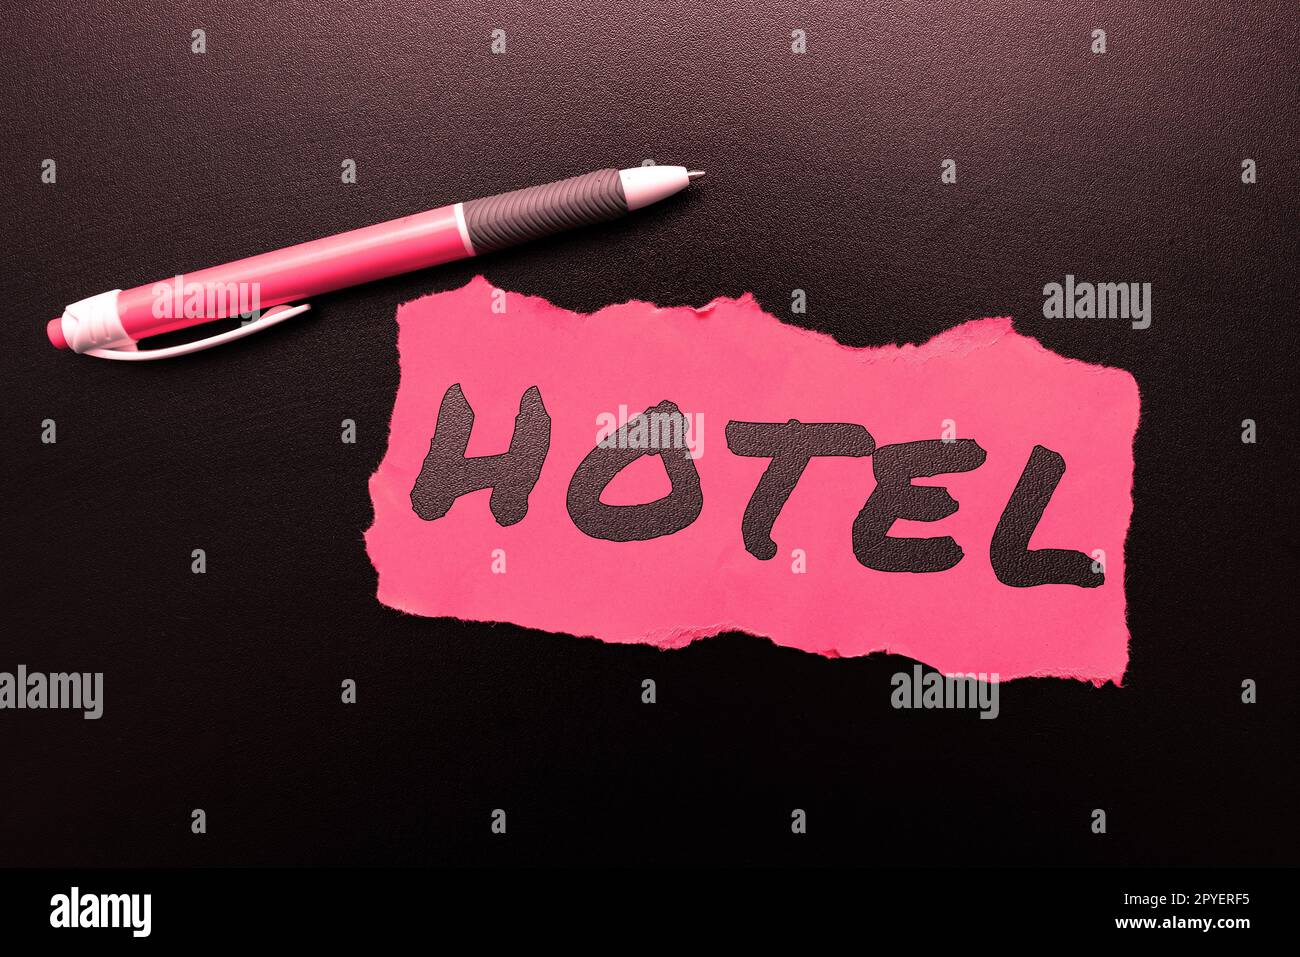 Inspiration showing sign Hotel. Business overview establishment providing accommodation meals services for travellers Stock Photo